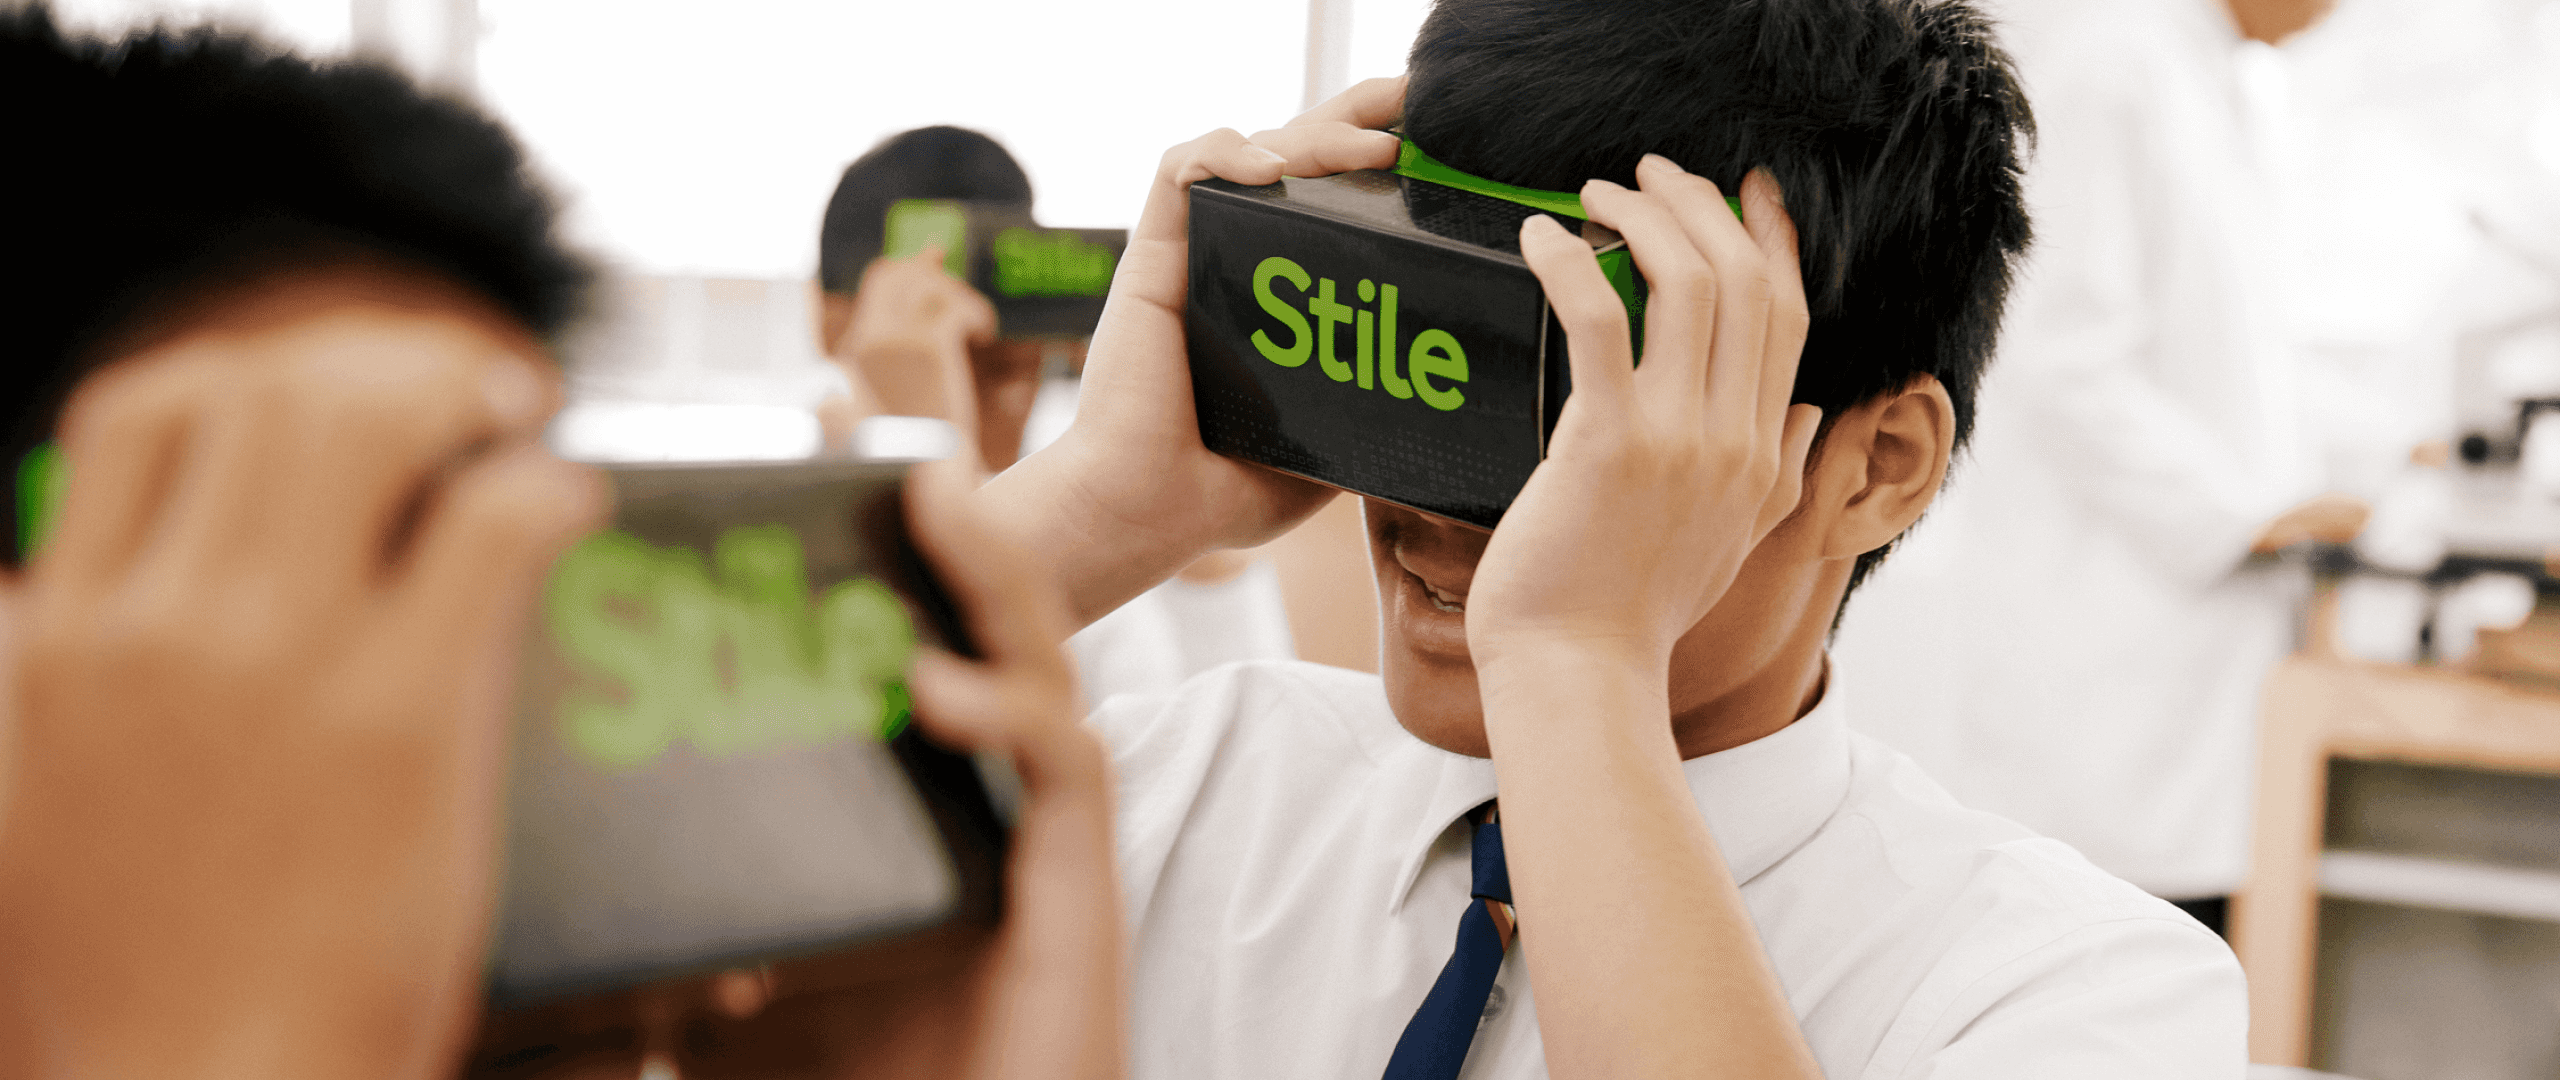 Several students holding Stile VR headsets up to their faces